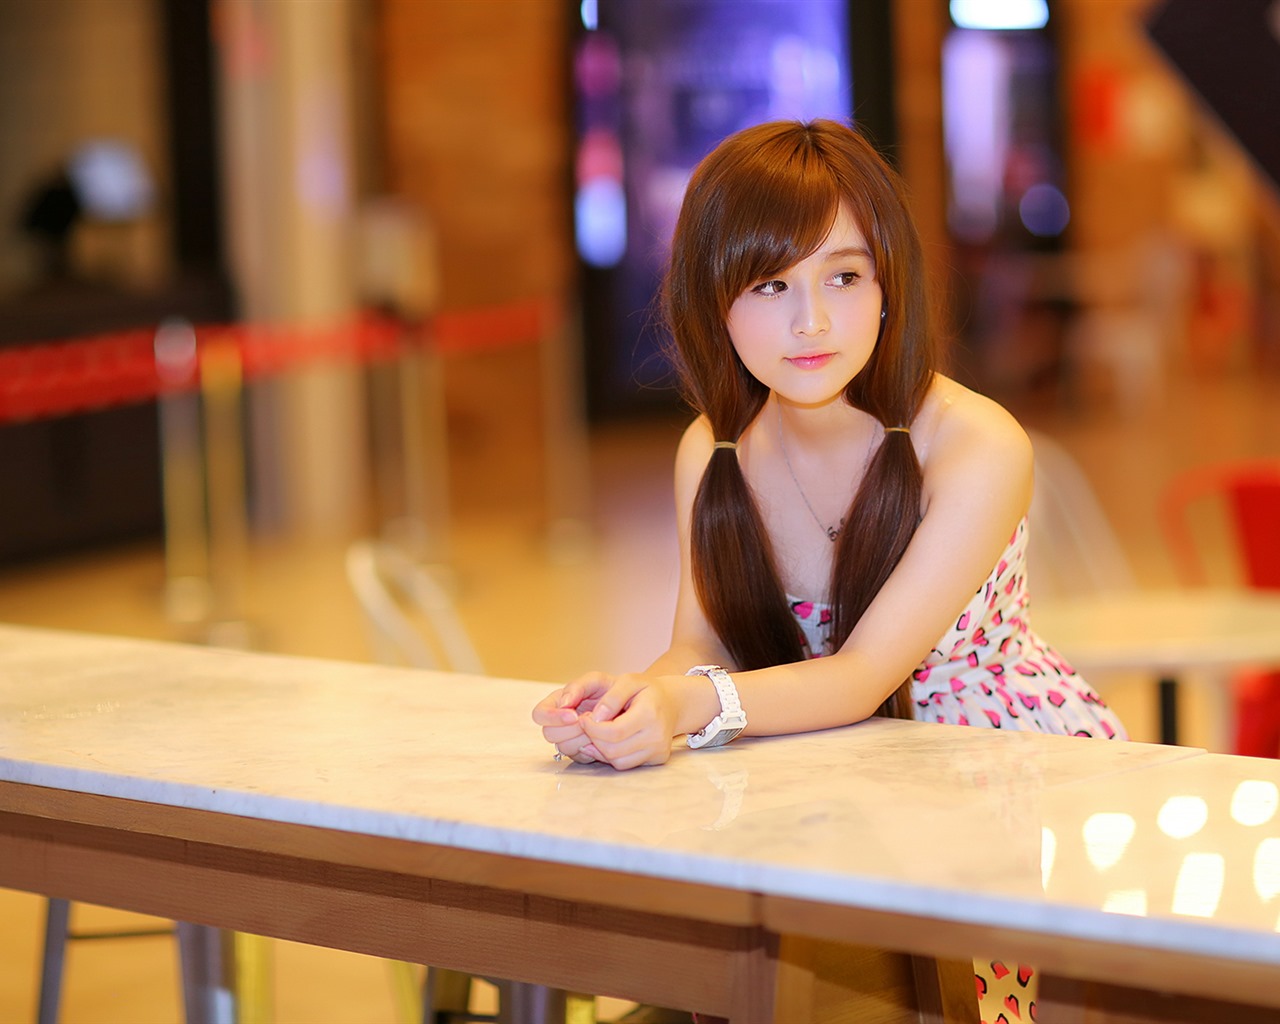 Pure and lovely young Asian girl HD wallpapers collection (2) #38 - 1280x1024